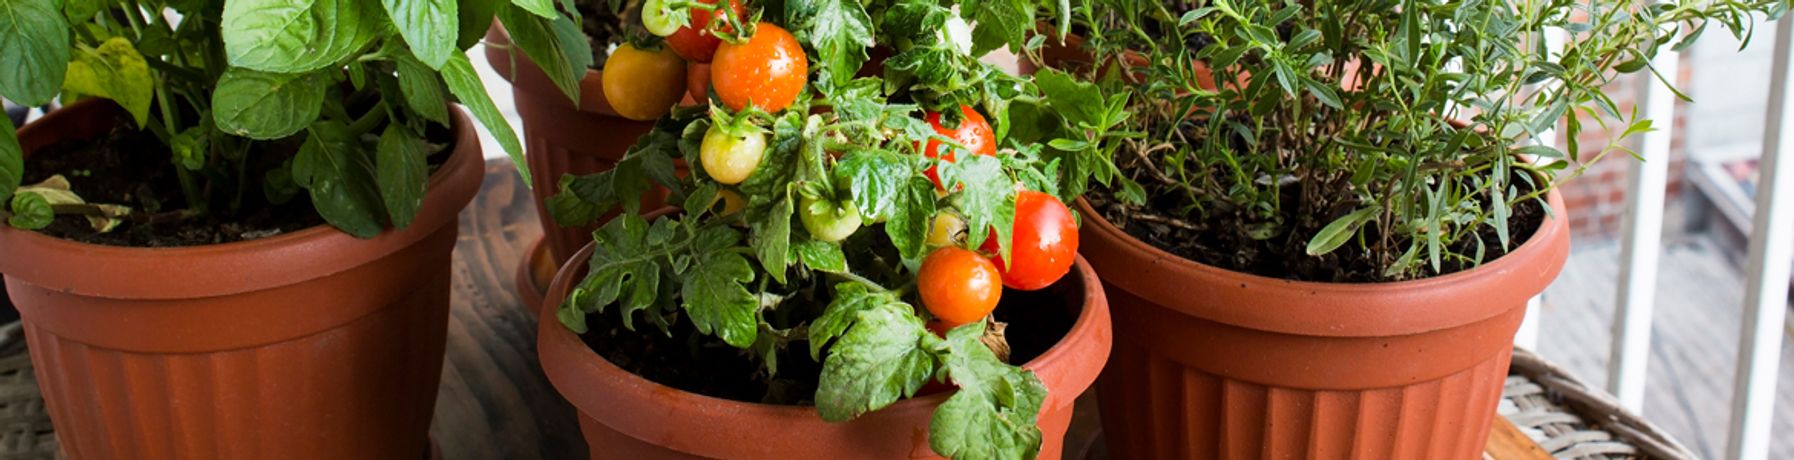 How to plant tomatoes: 7 Common mistakes when Growing Tomatoes in Pots-0